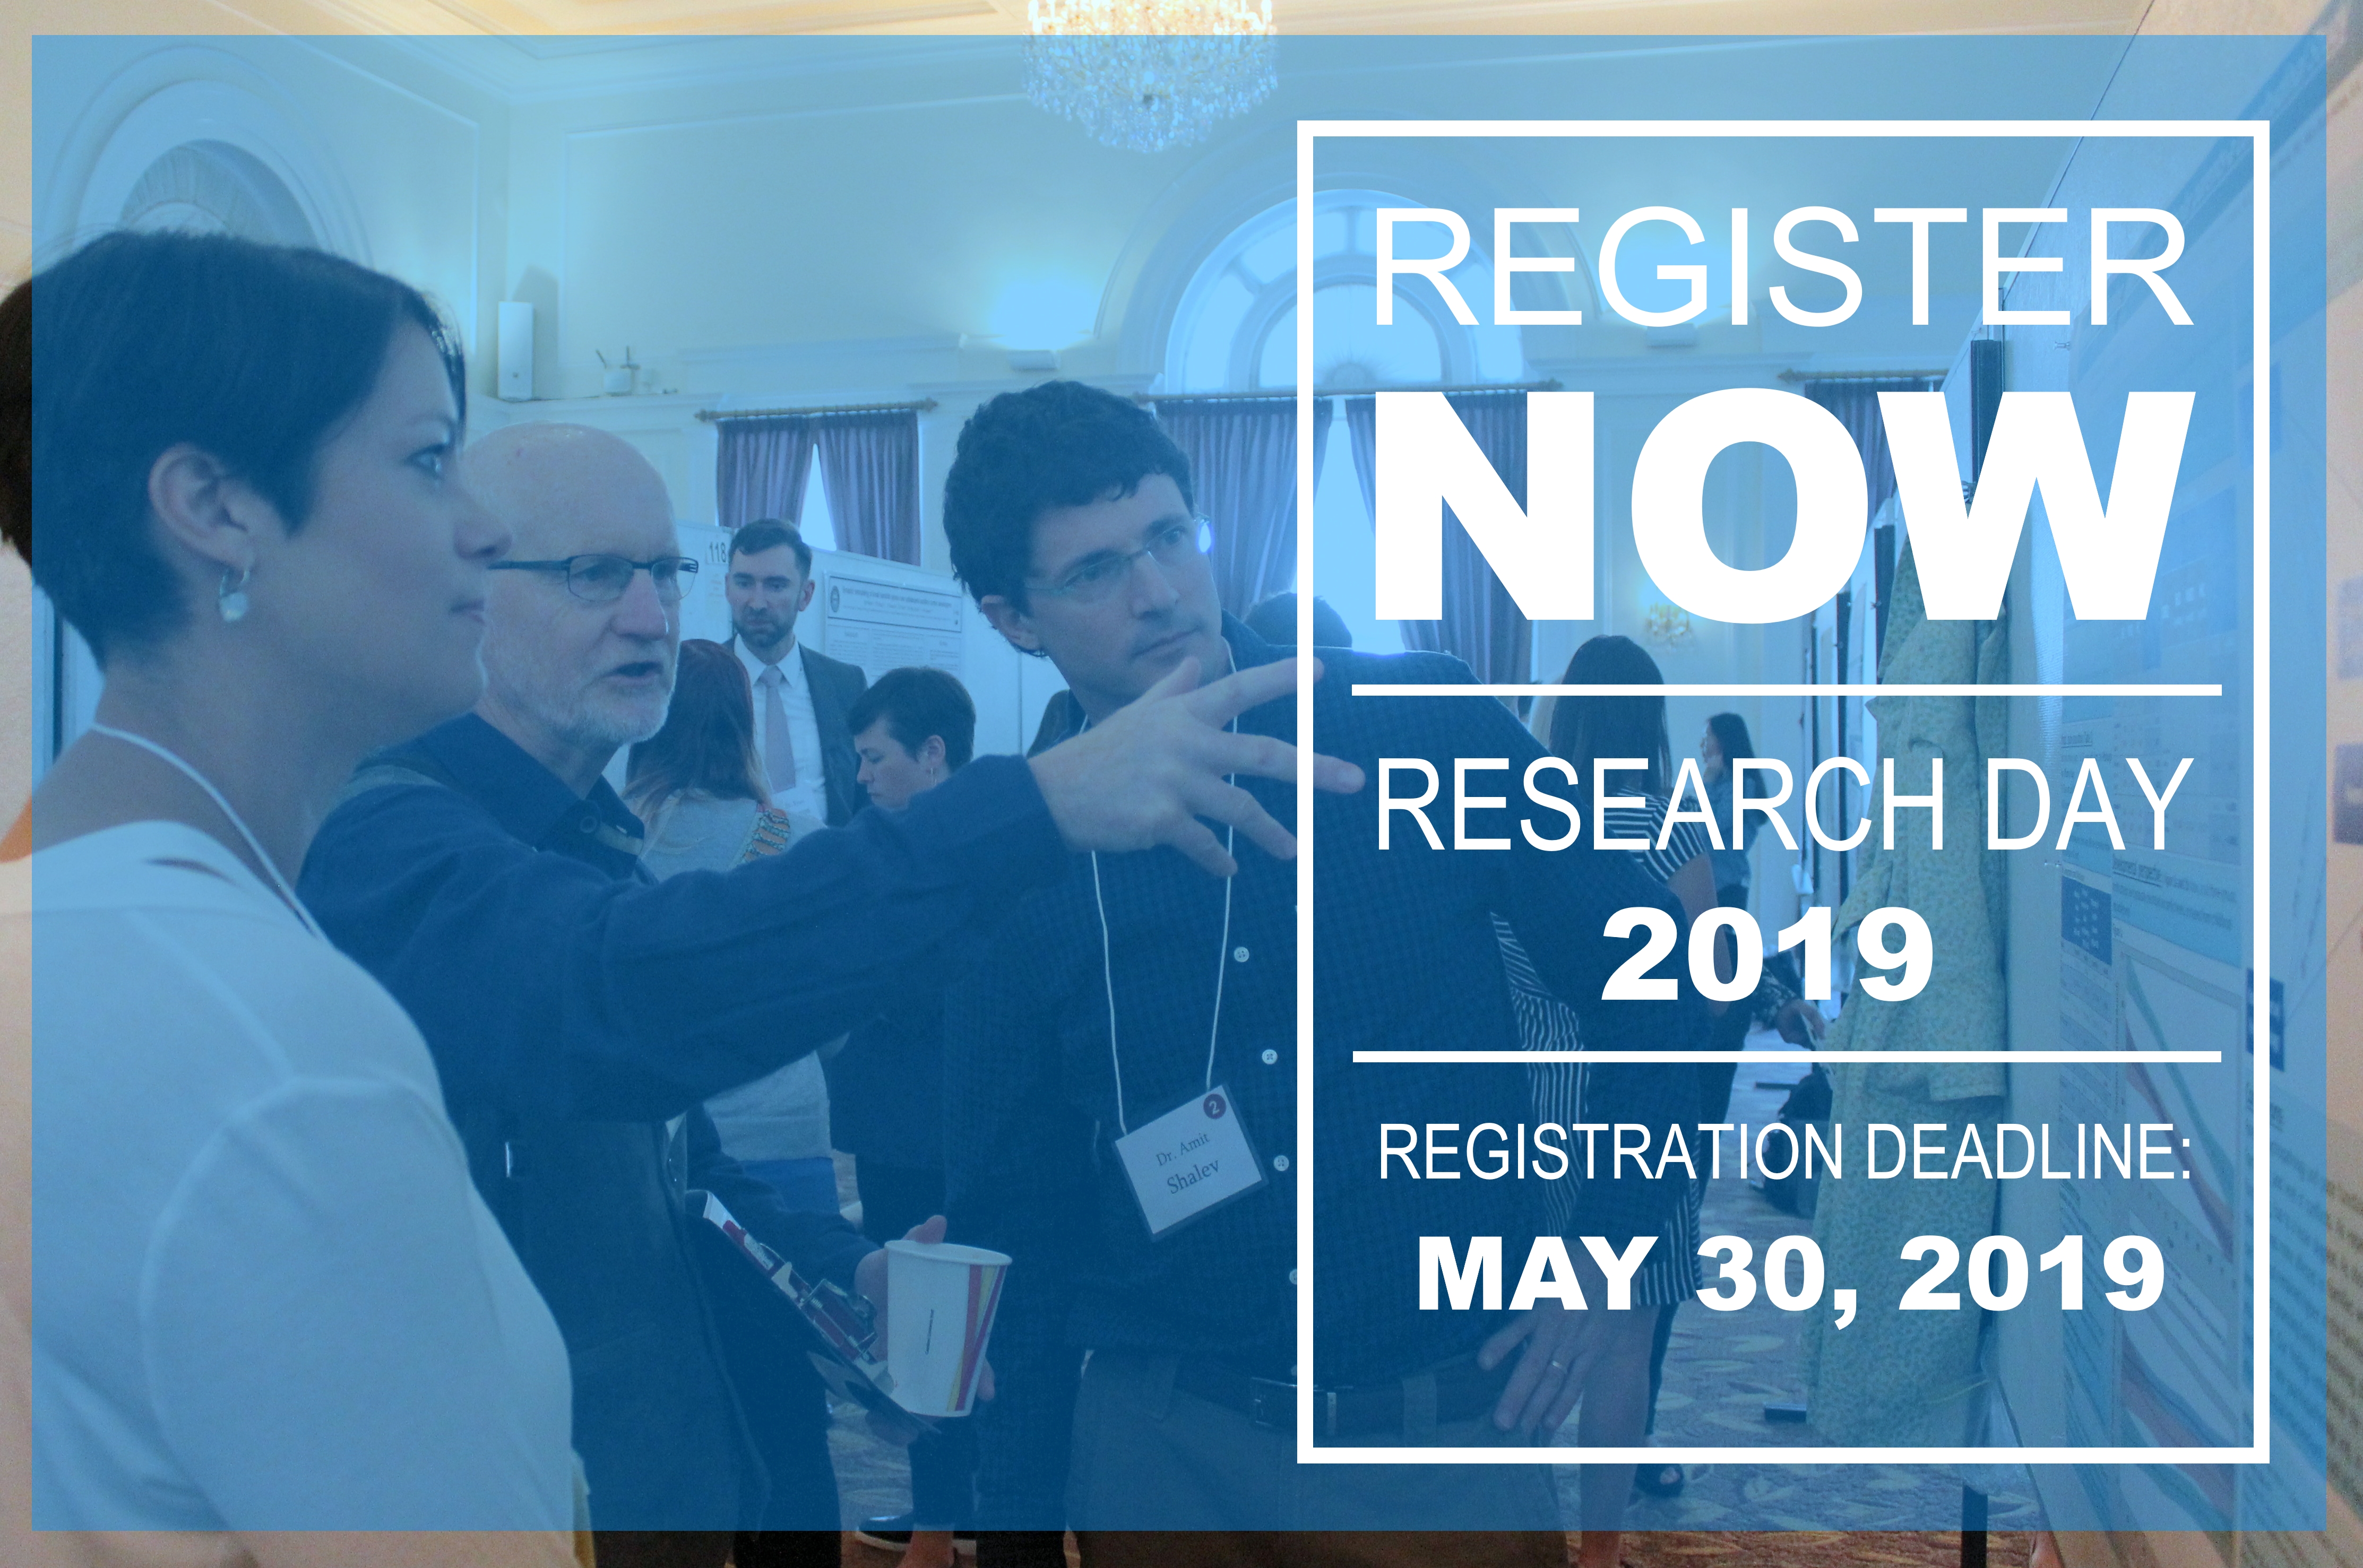 Register Now for Research Day 2019